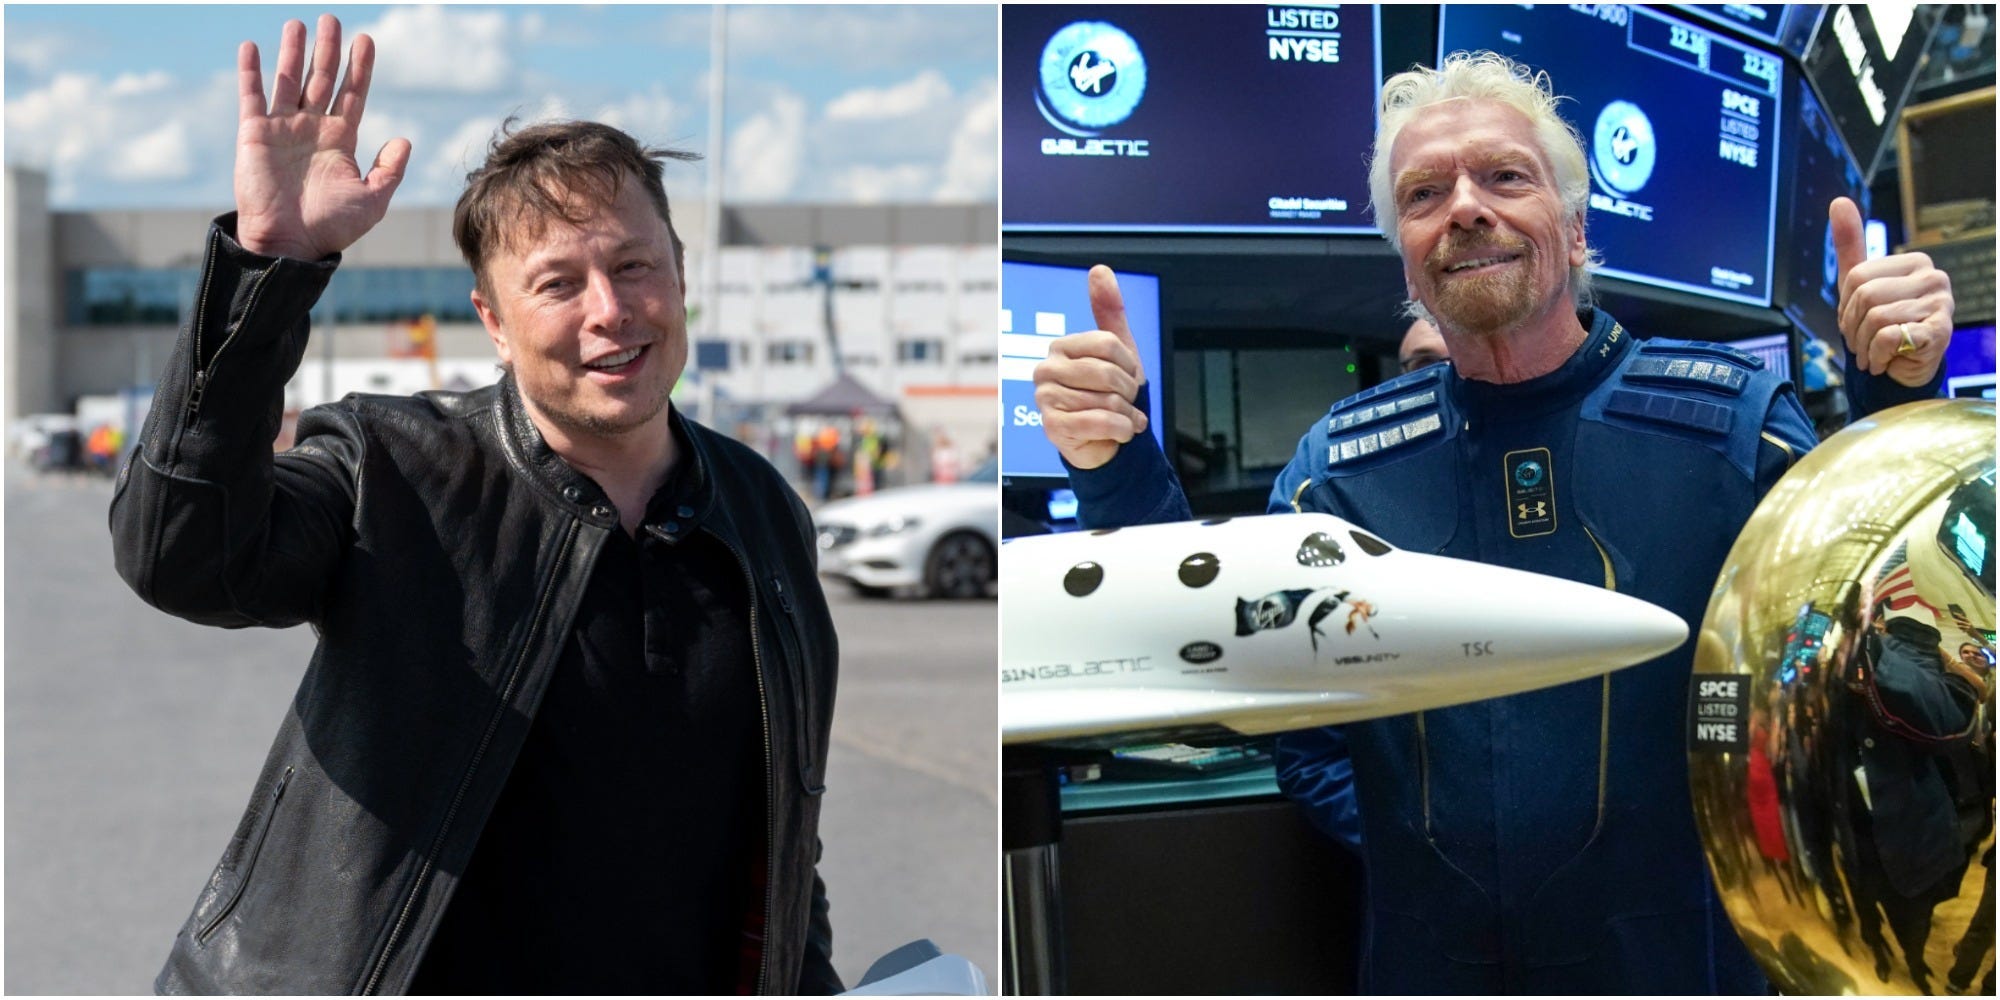 Elon Musk wishes Richard Branson well ahead of his space flight, implies he will be there to watch the Virgin Galactic launch